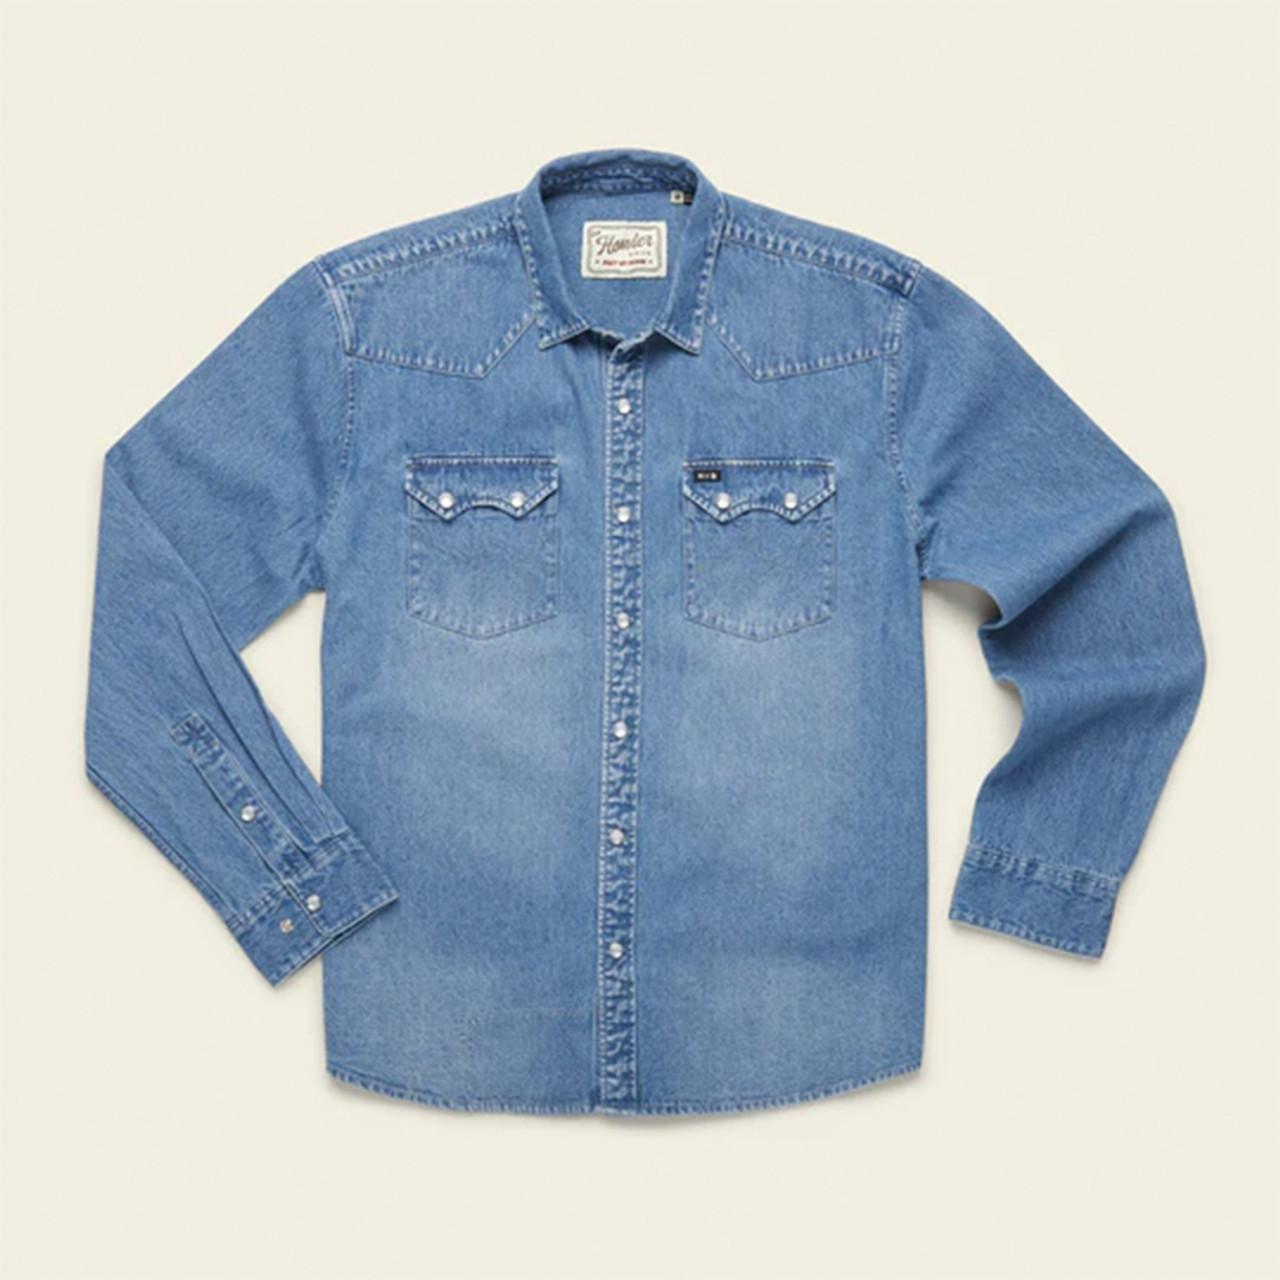 Dust Up Denim Snapshirt60590 - Gordy & Sons Outfitters